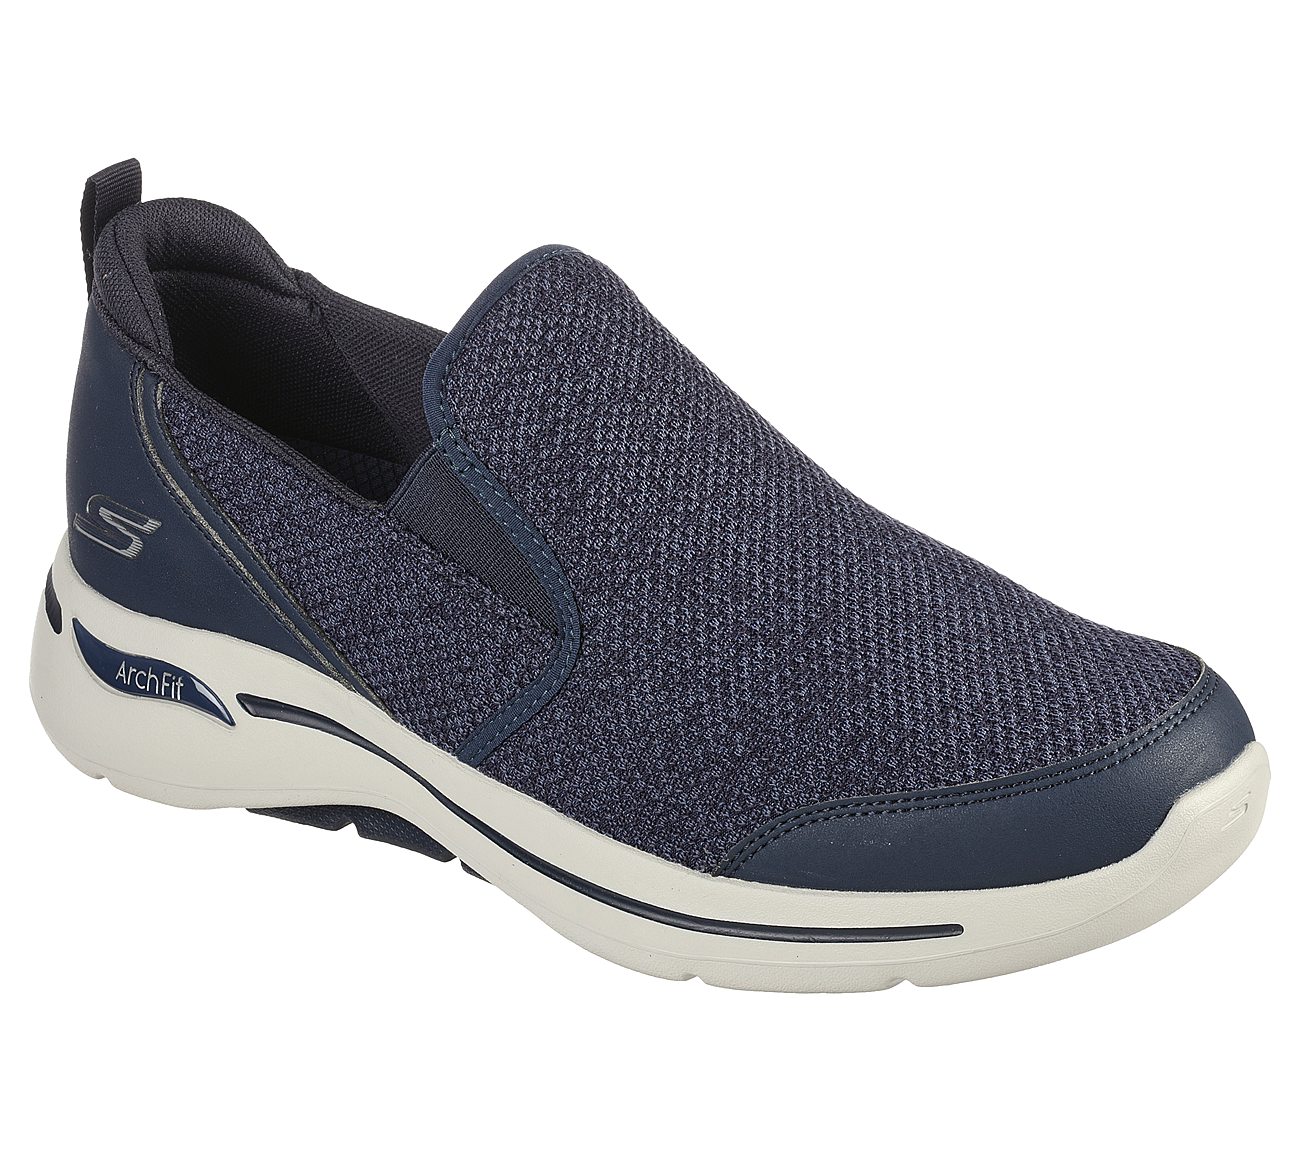 Skechers Navy Go Walk Arch Fit Goodman Mens Slip On Shoes - Style ID ...